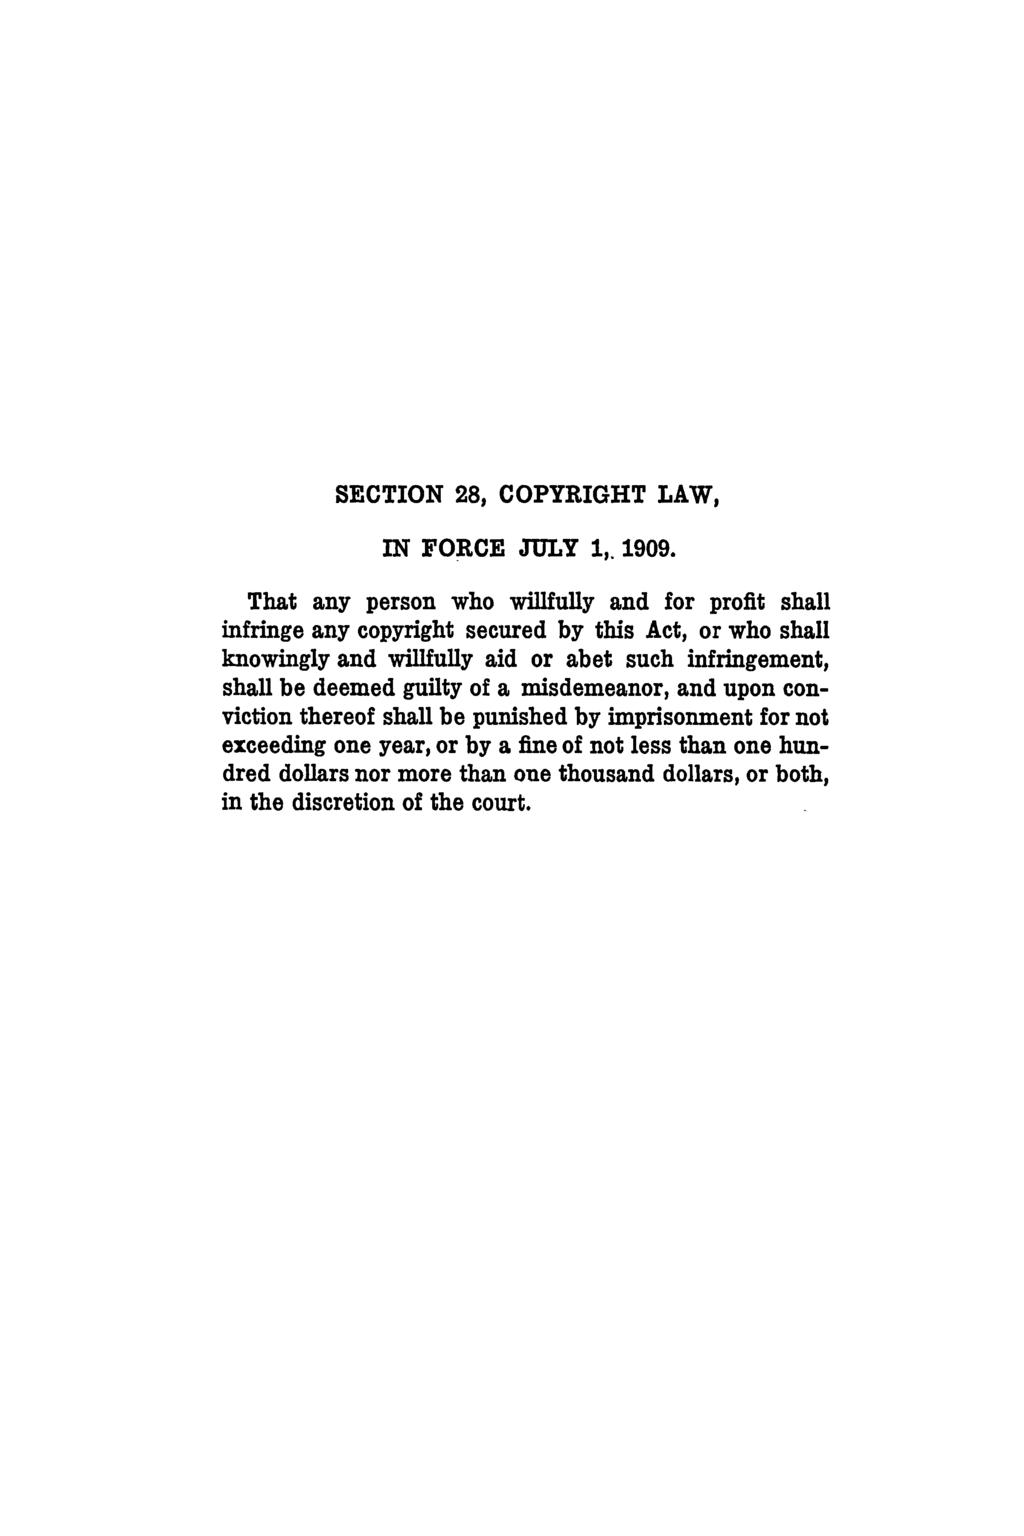 SECTION 28, COPYRIGHT LAW, IN FORCE JULY 1,. 1909.